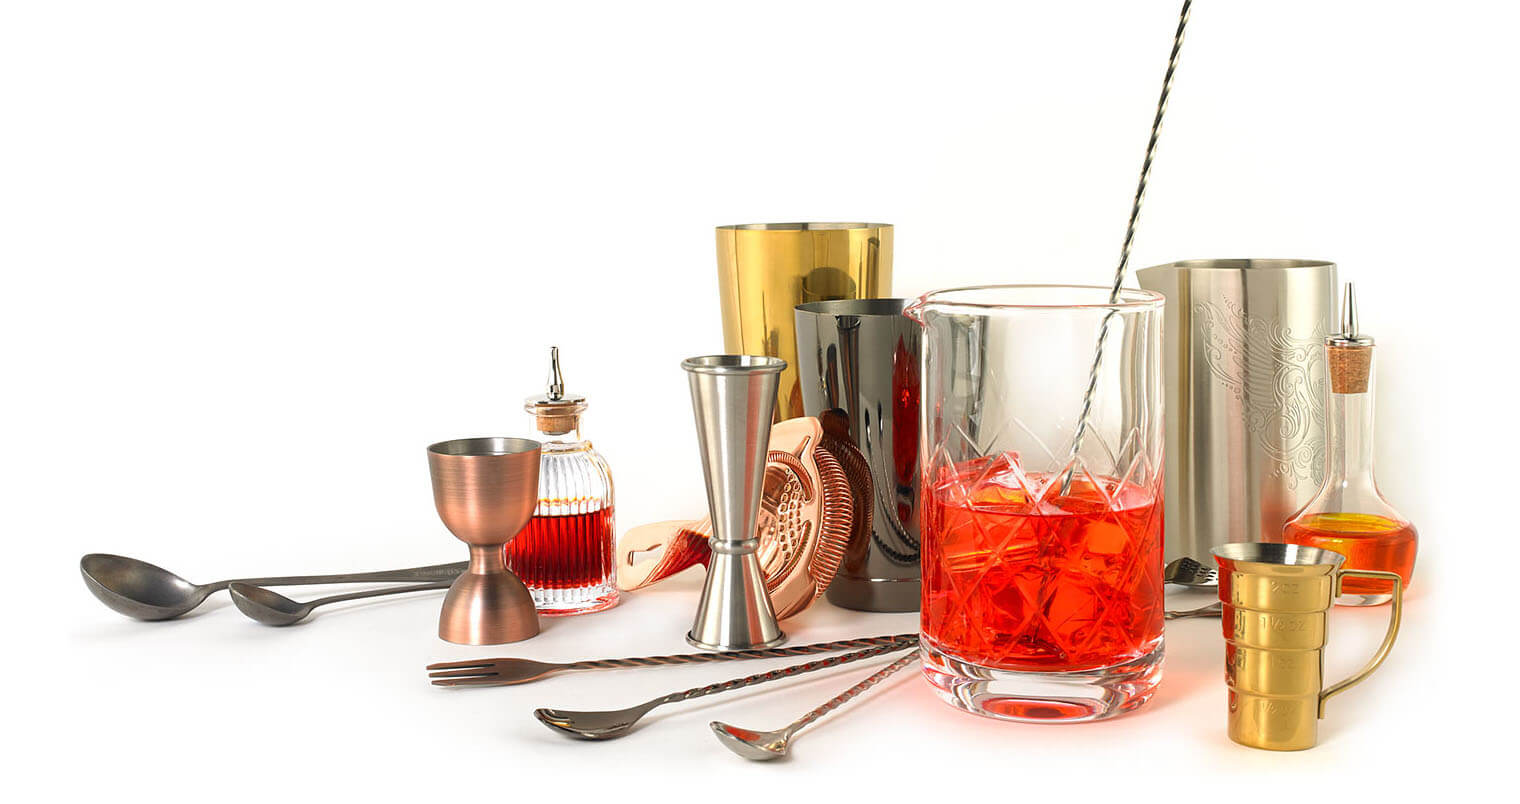 Barfly Mixology Gear by Mercer featured image